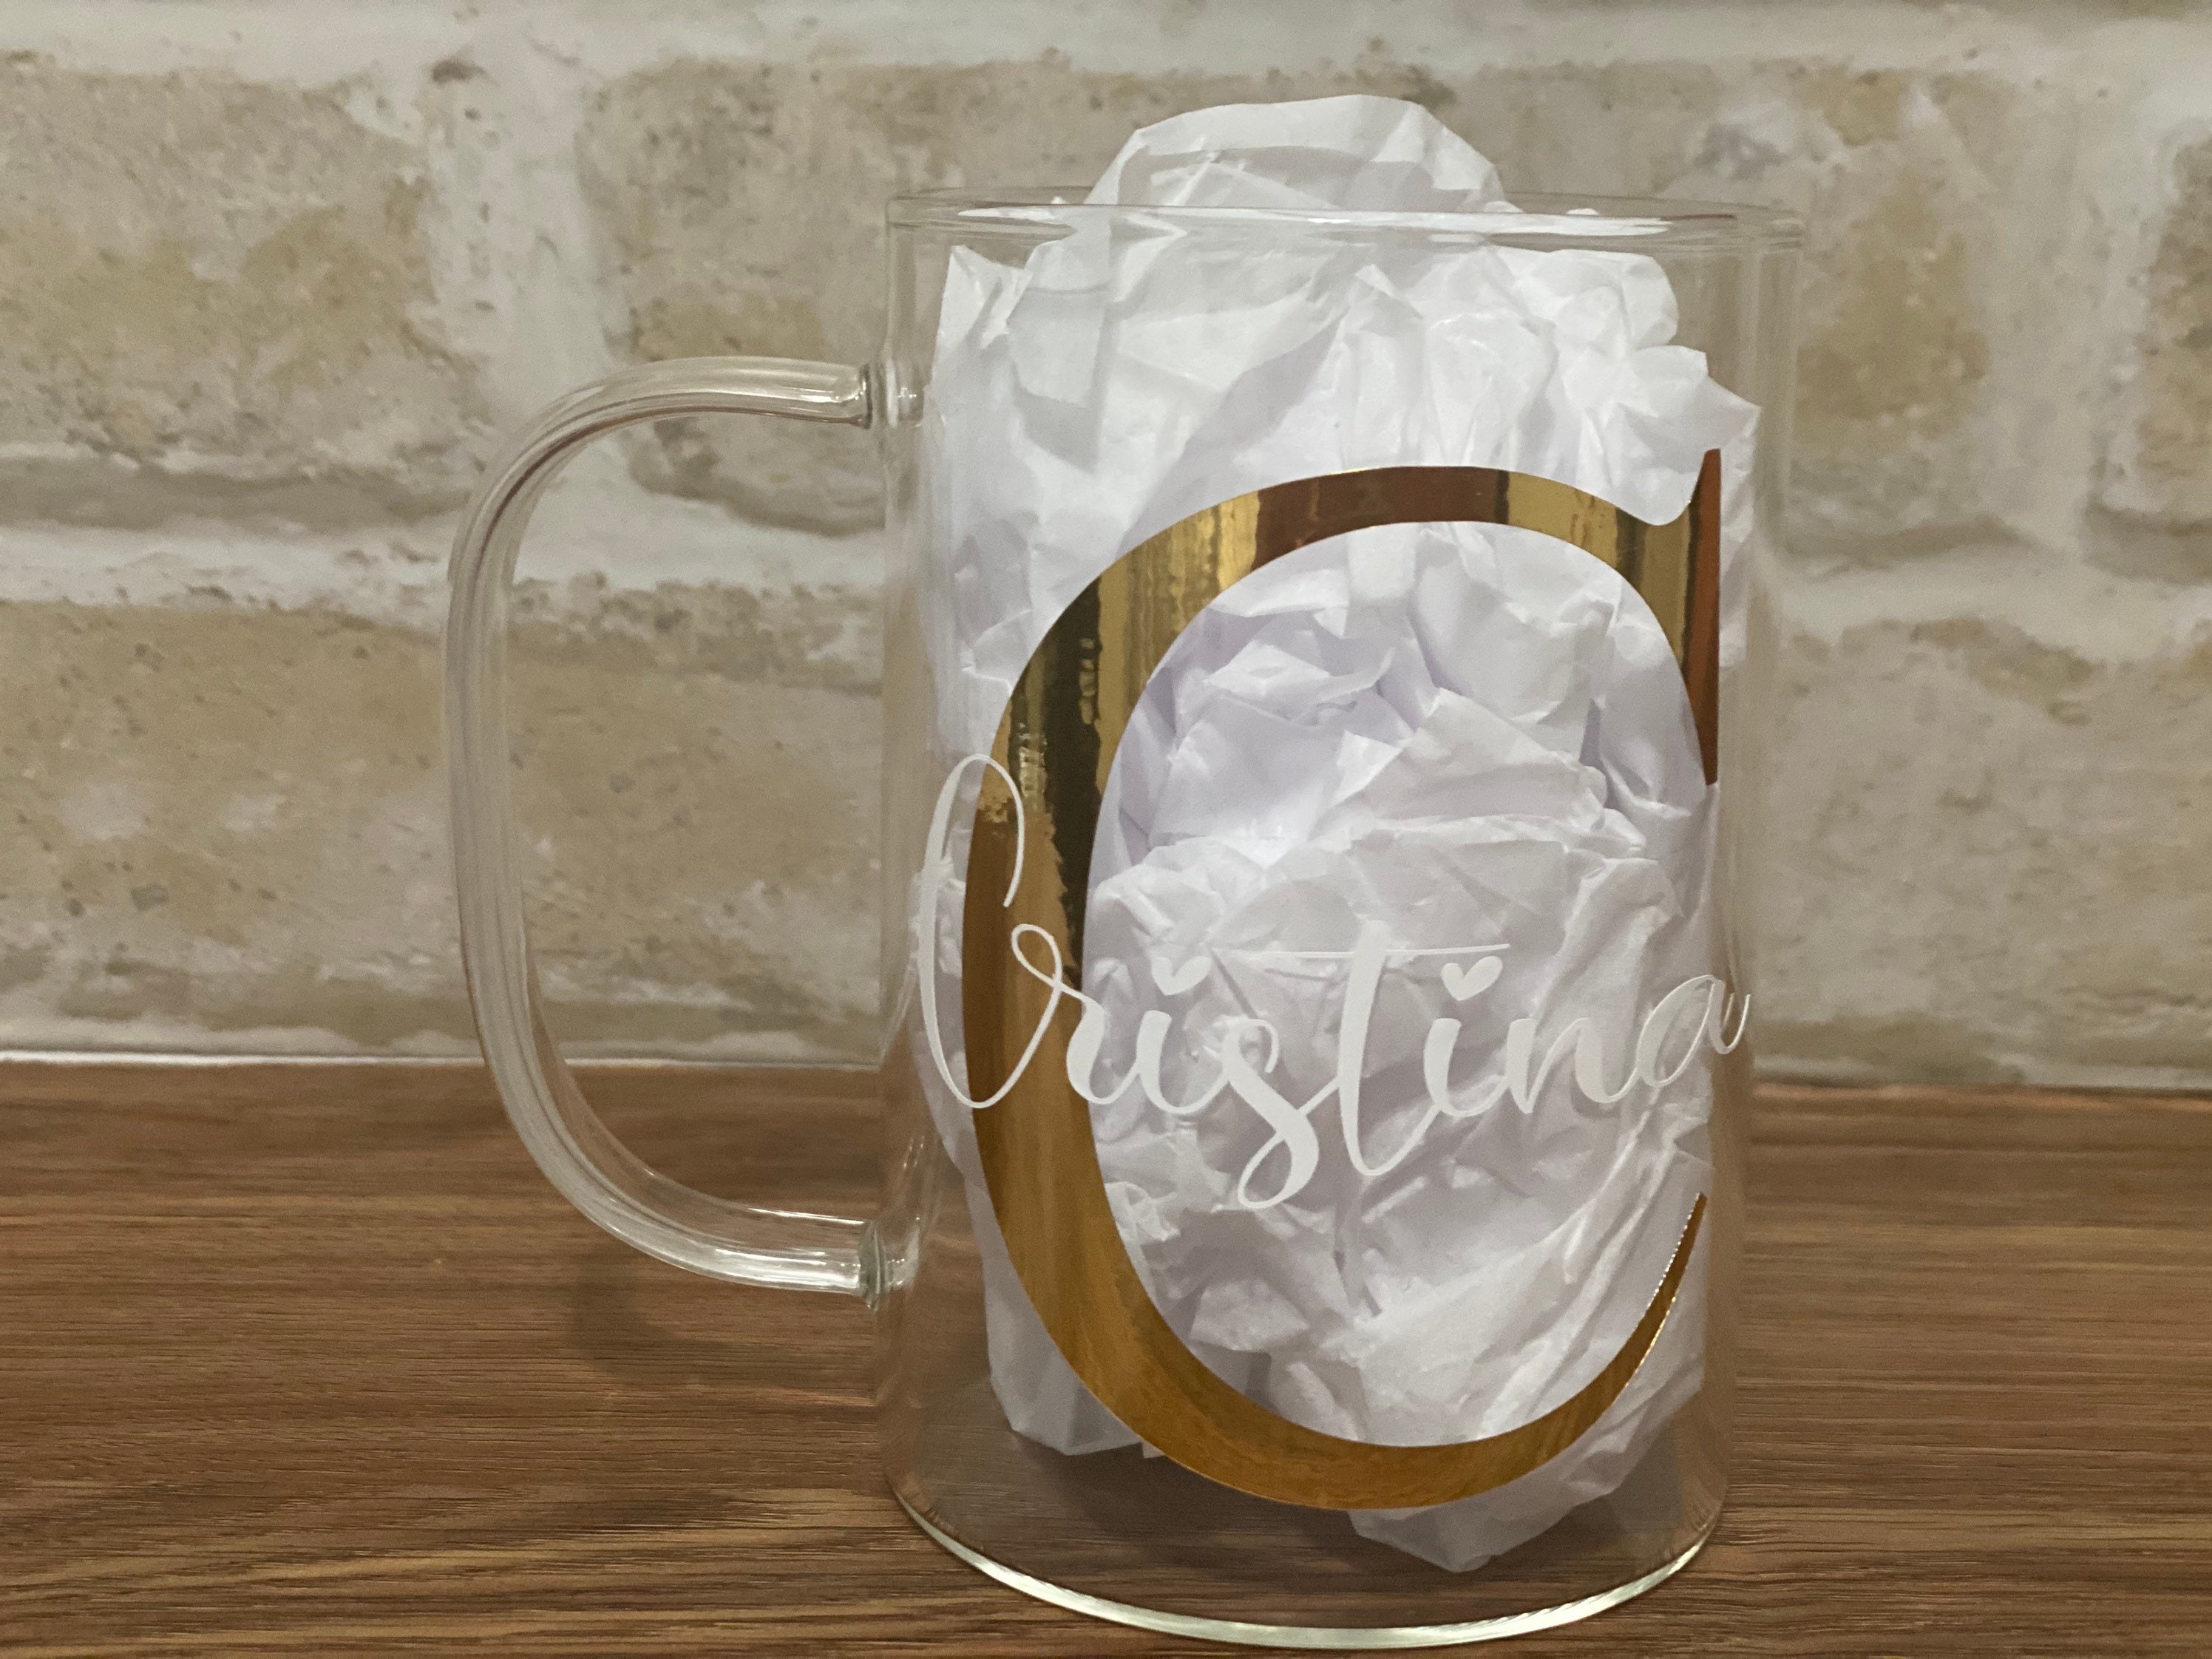 Monogram Glass Mug 16 Oz Clear Glass Mug Large Thin Lightweight Cups for  Beer, Coffee, Tea, Juice, for Hot or Cold Beverages 